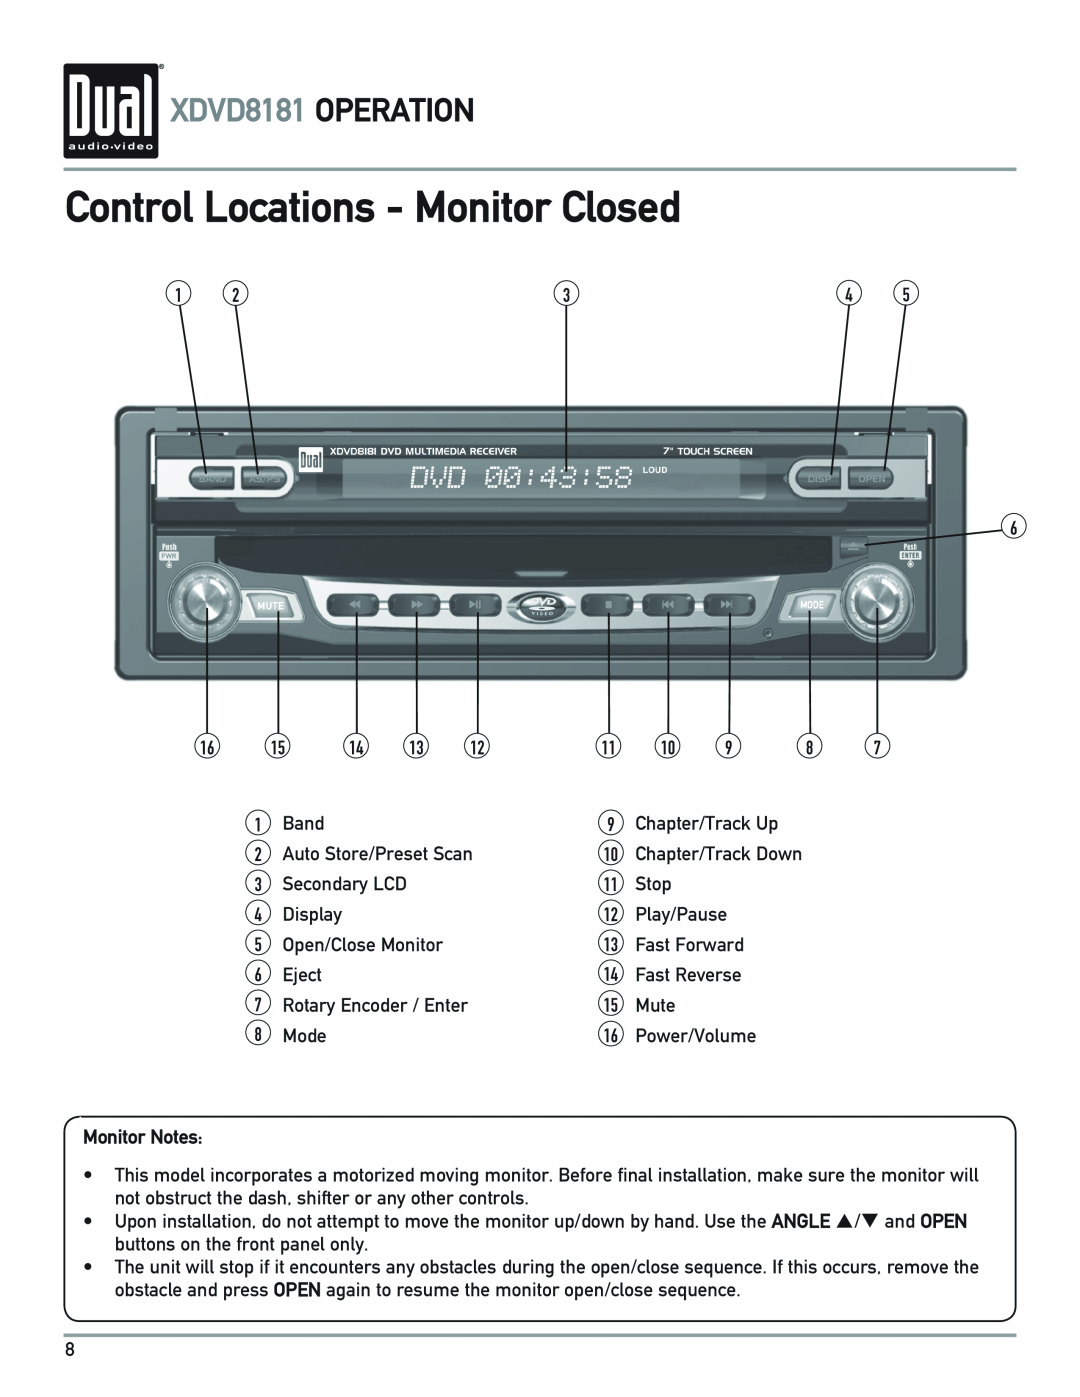 Dual owner manual Control Locations - Monitor Closed, XDVD8181 OPERATION, Monitor Notes 